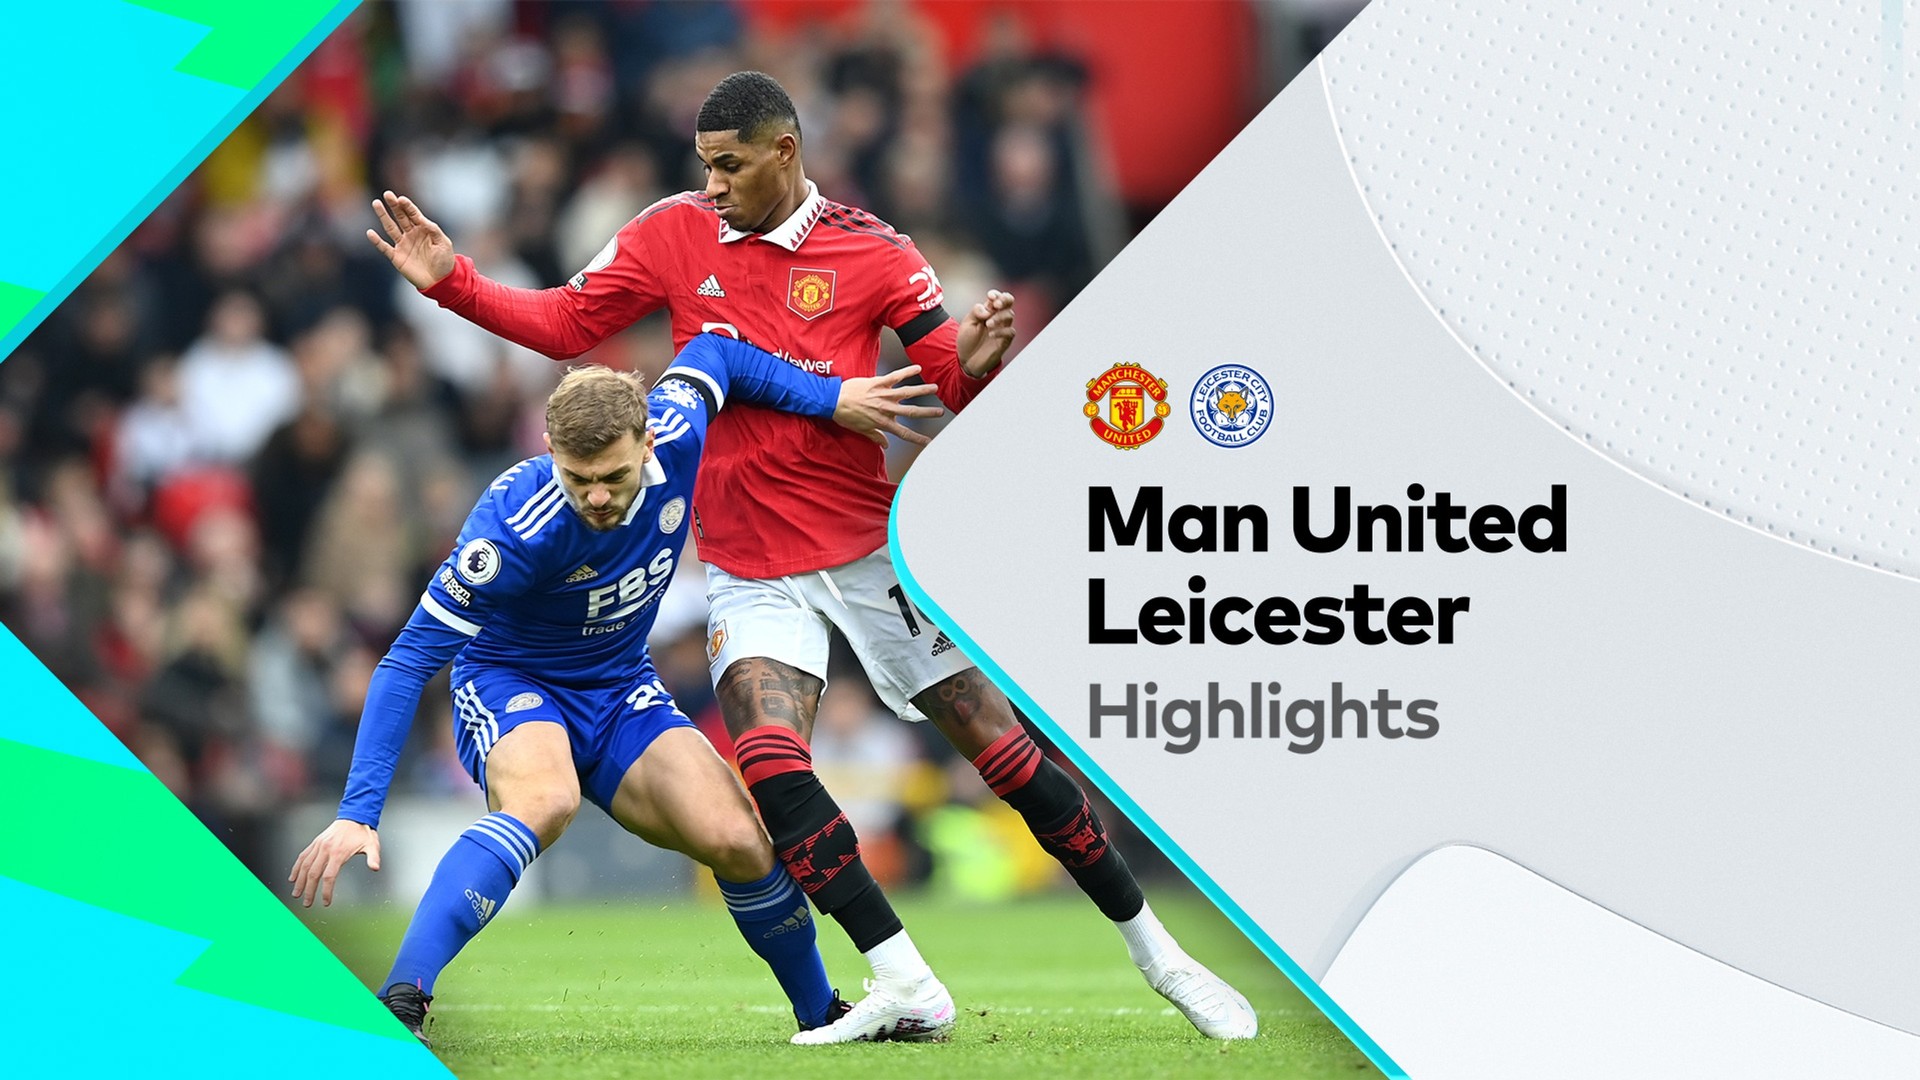 Highlights: Manchester United v Leicester League 19-02-2023